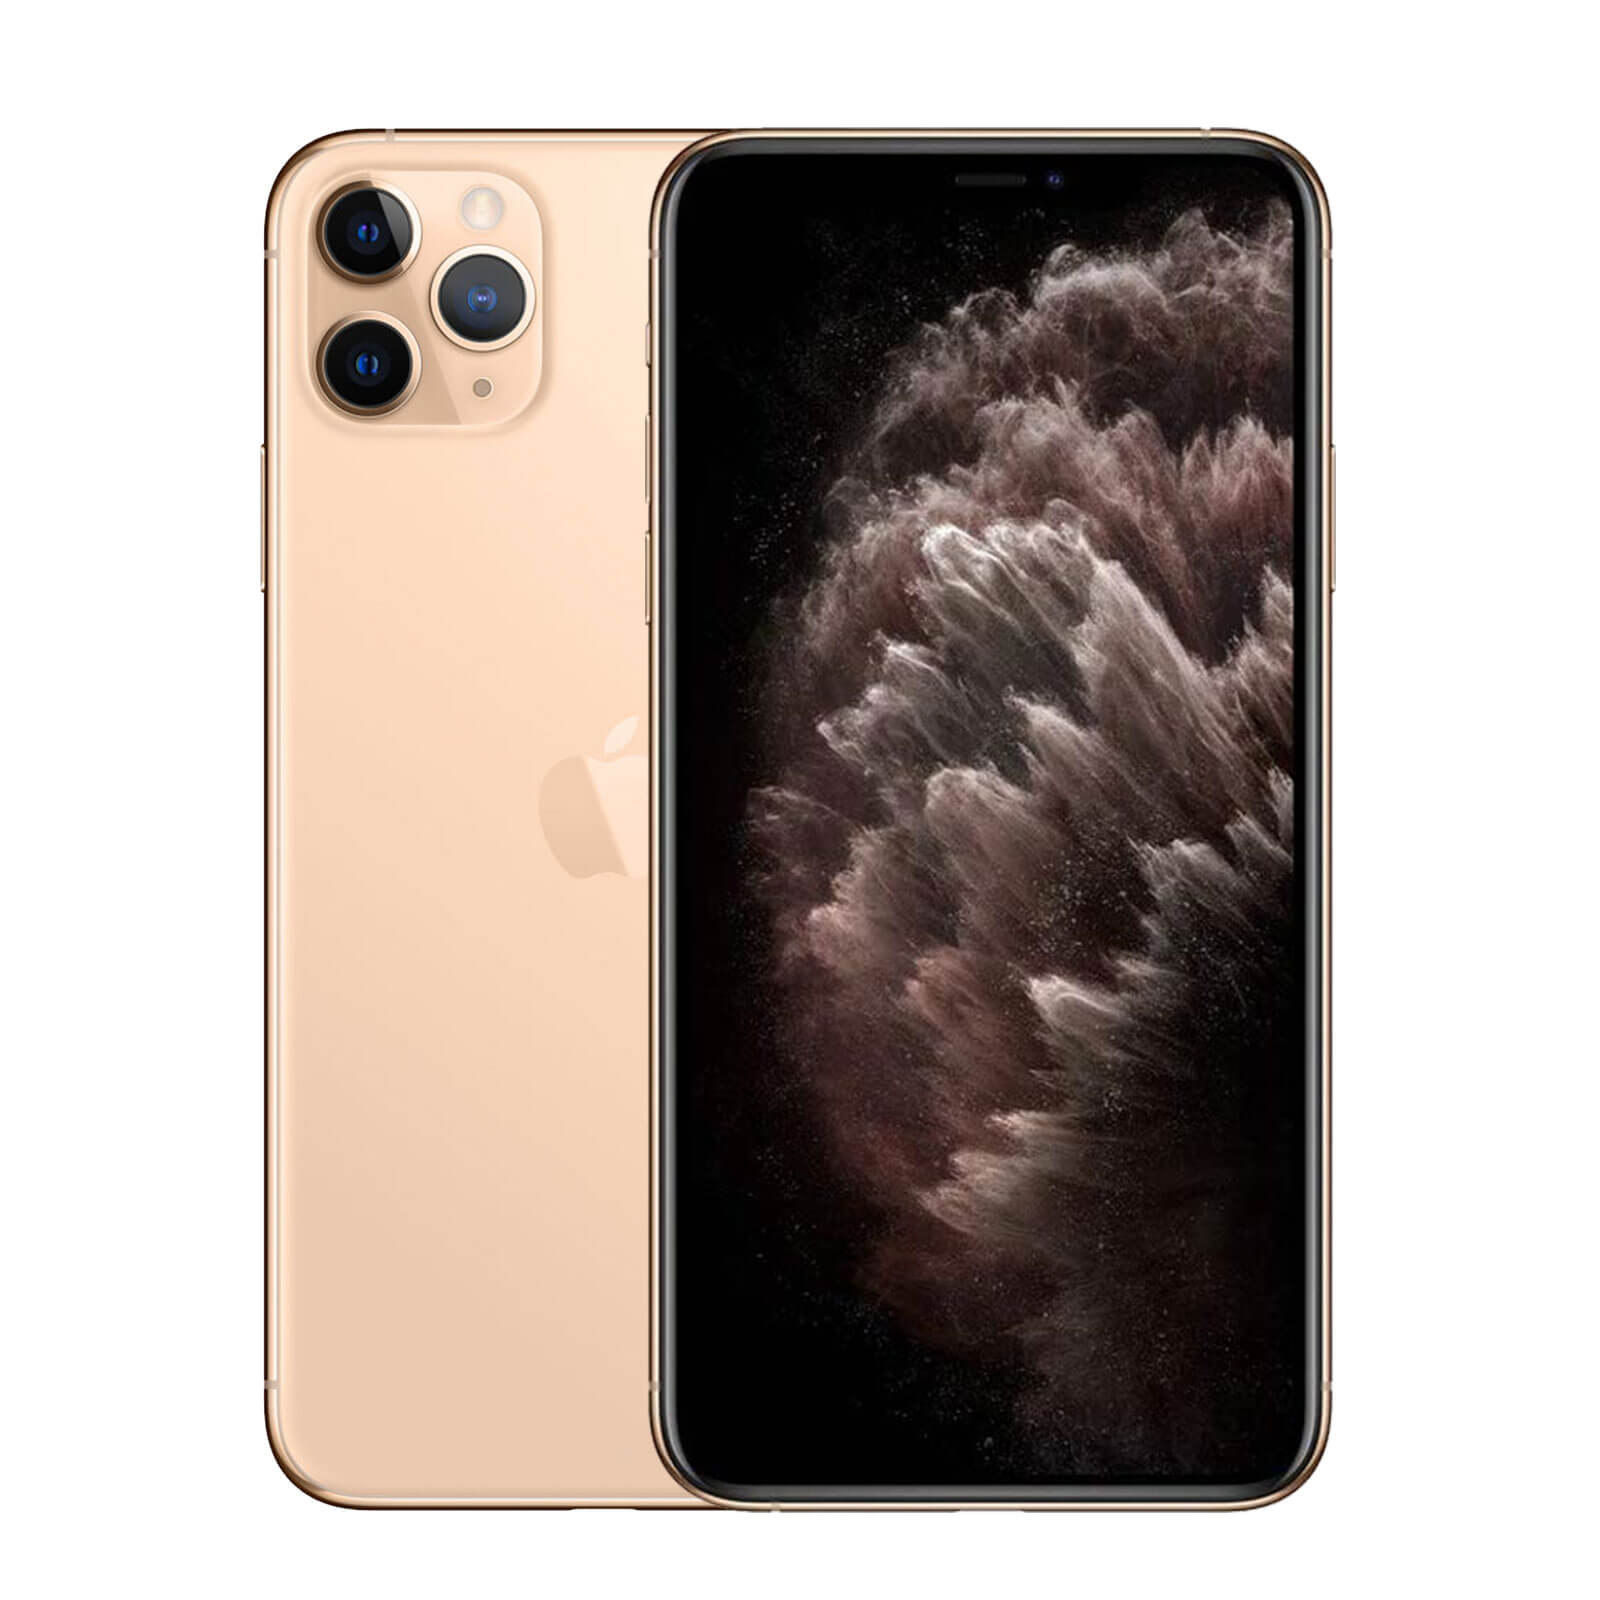 Apple iPhone 11 Pro Max 64GB Gold Good - T-Mobile